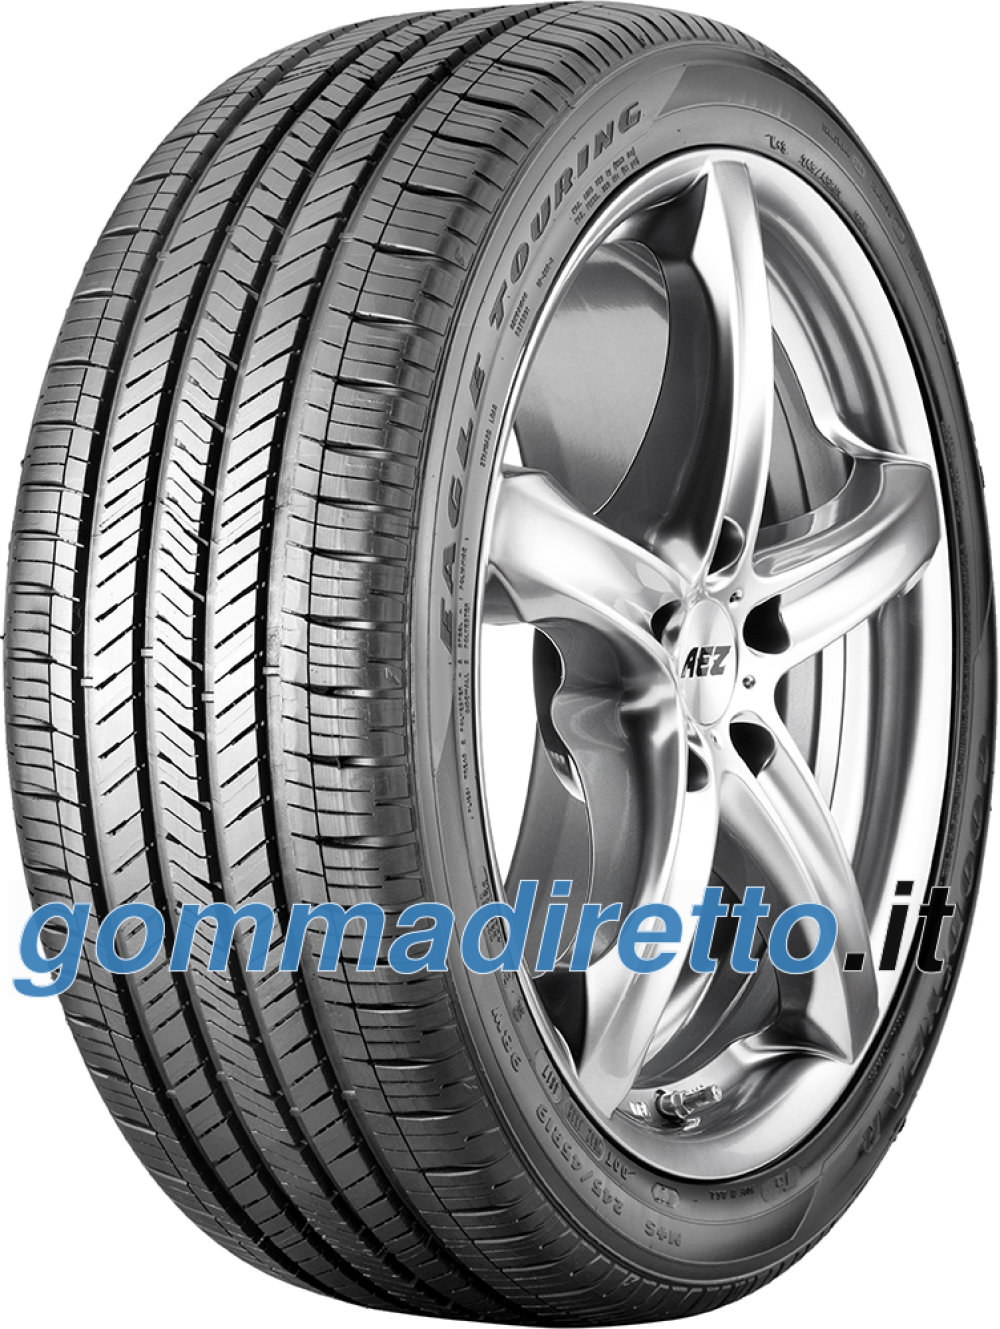 Image of Goodyear Eagle Touring ( 275/45 R19 108H XL, NF0 )